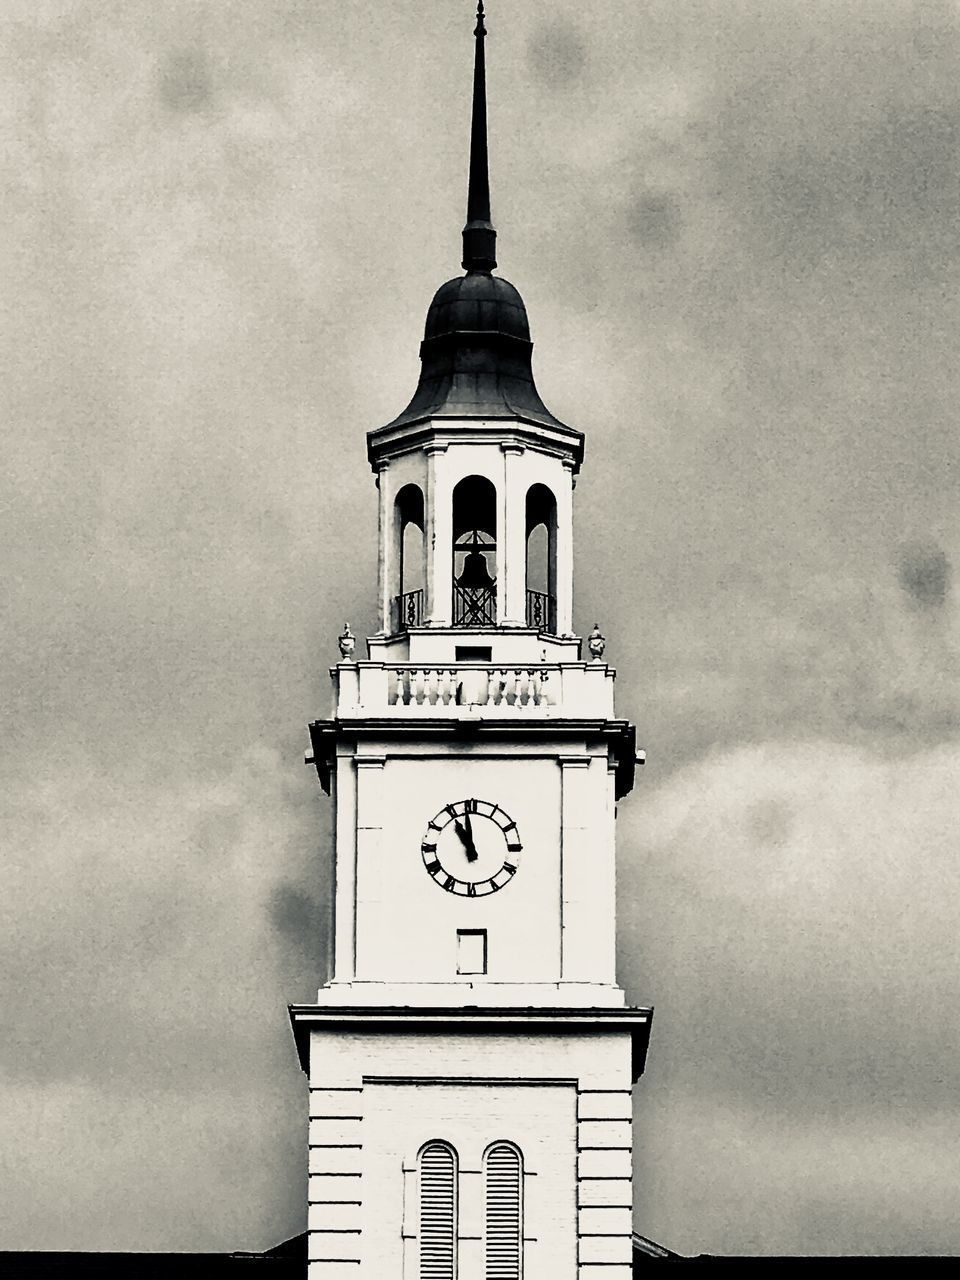 LOW ANGLE VIEW OF CLOCK TOWER ON BUILDING AGAINST SKY